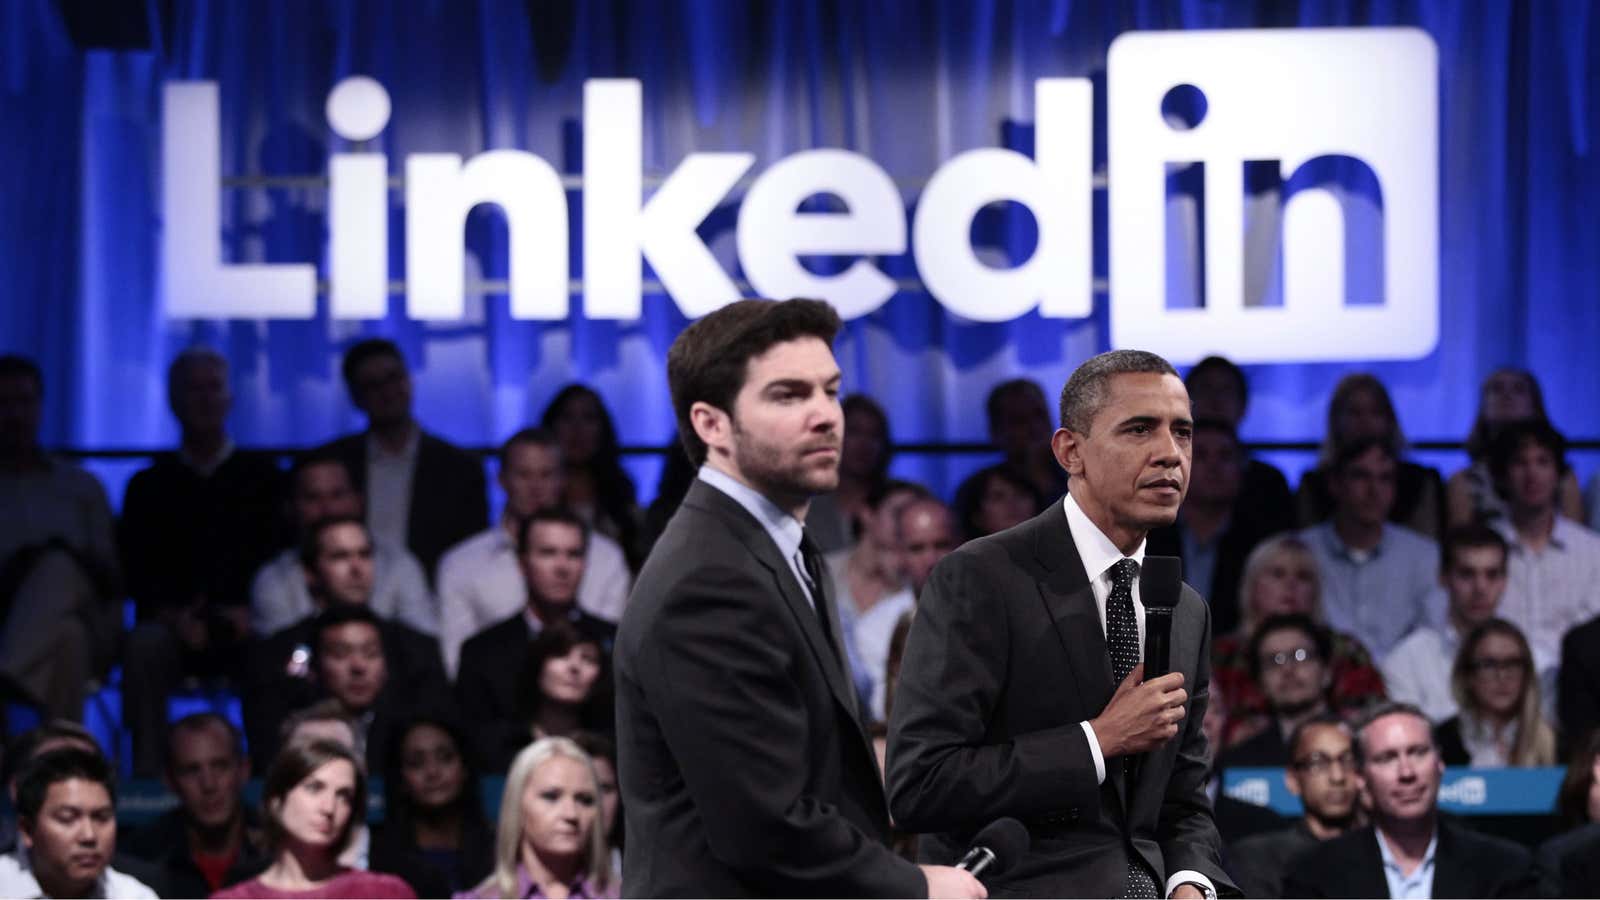 Last year, LinkedIn hosted a town hall meeting where President Obama urged Silicon Valley to help the rest of those still struggling economically.